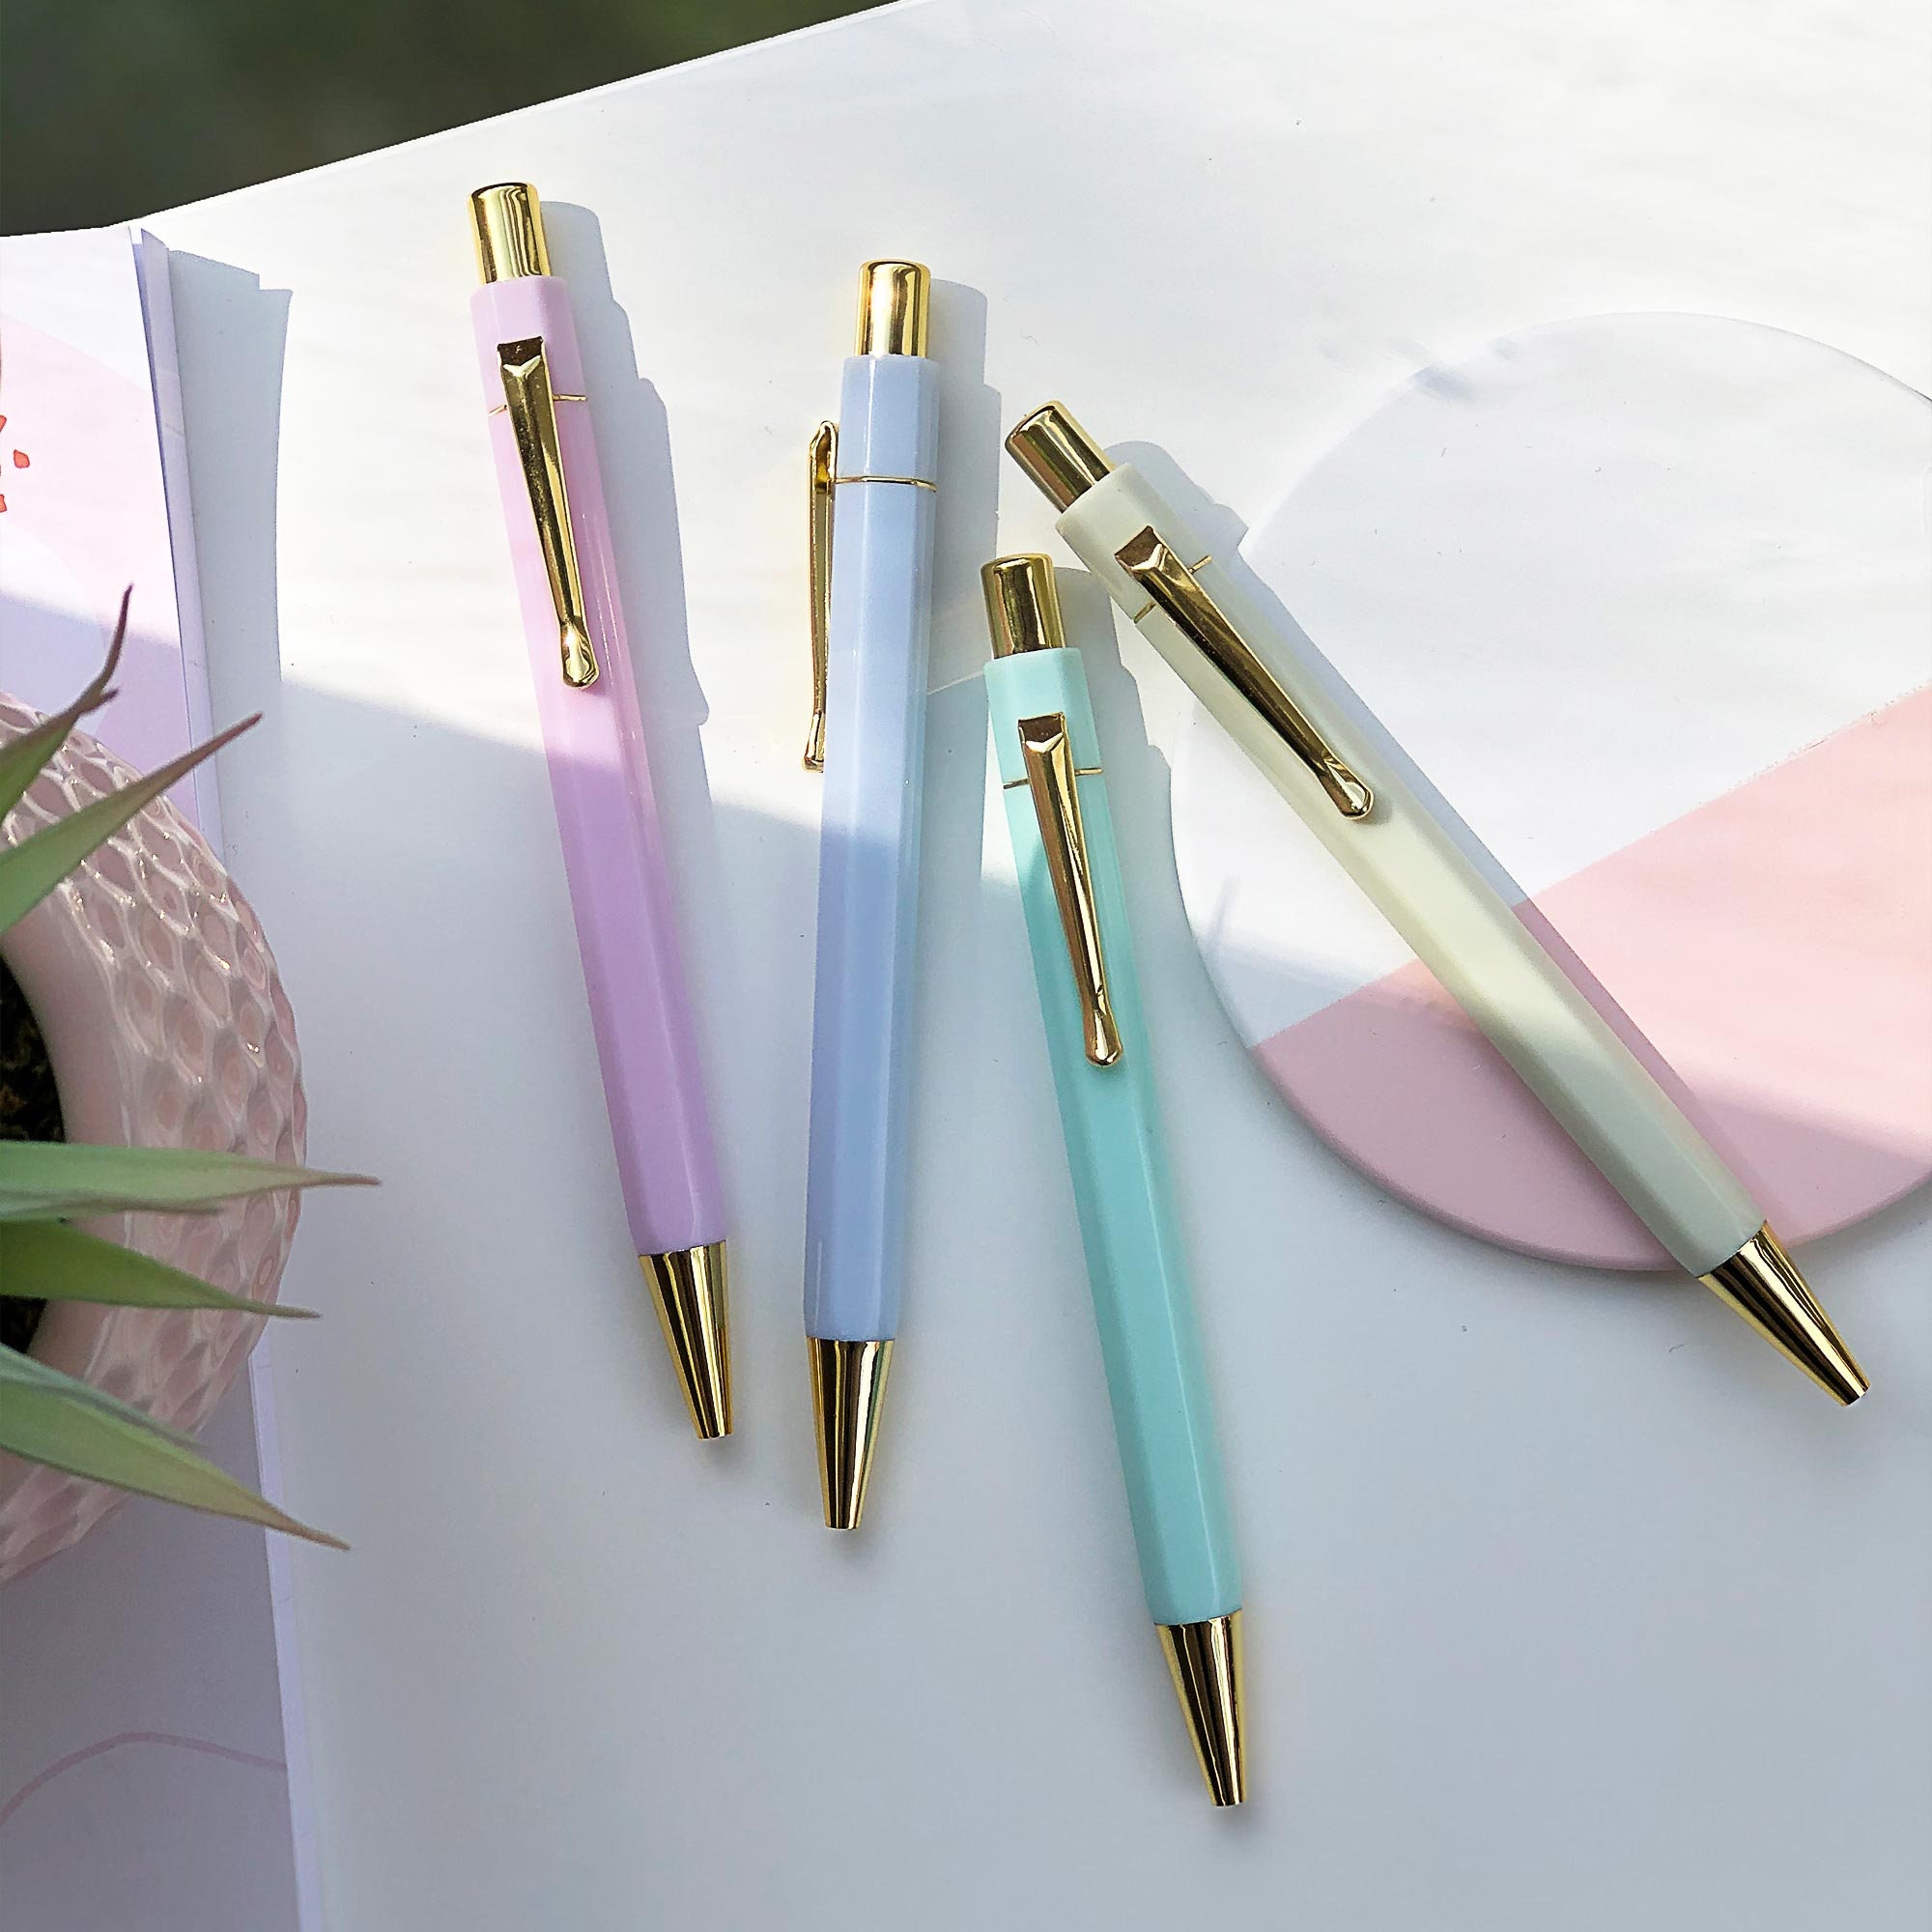 Hexagon PASTEL & GOLD Pen Smooth Writing Black Ink Pen W/ Gold Clip  Minimalist Ballpoint Click Retractable Pens Stationery Journaling 